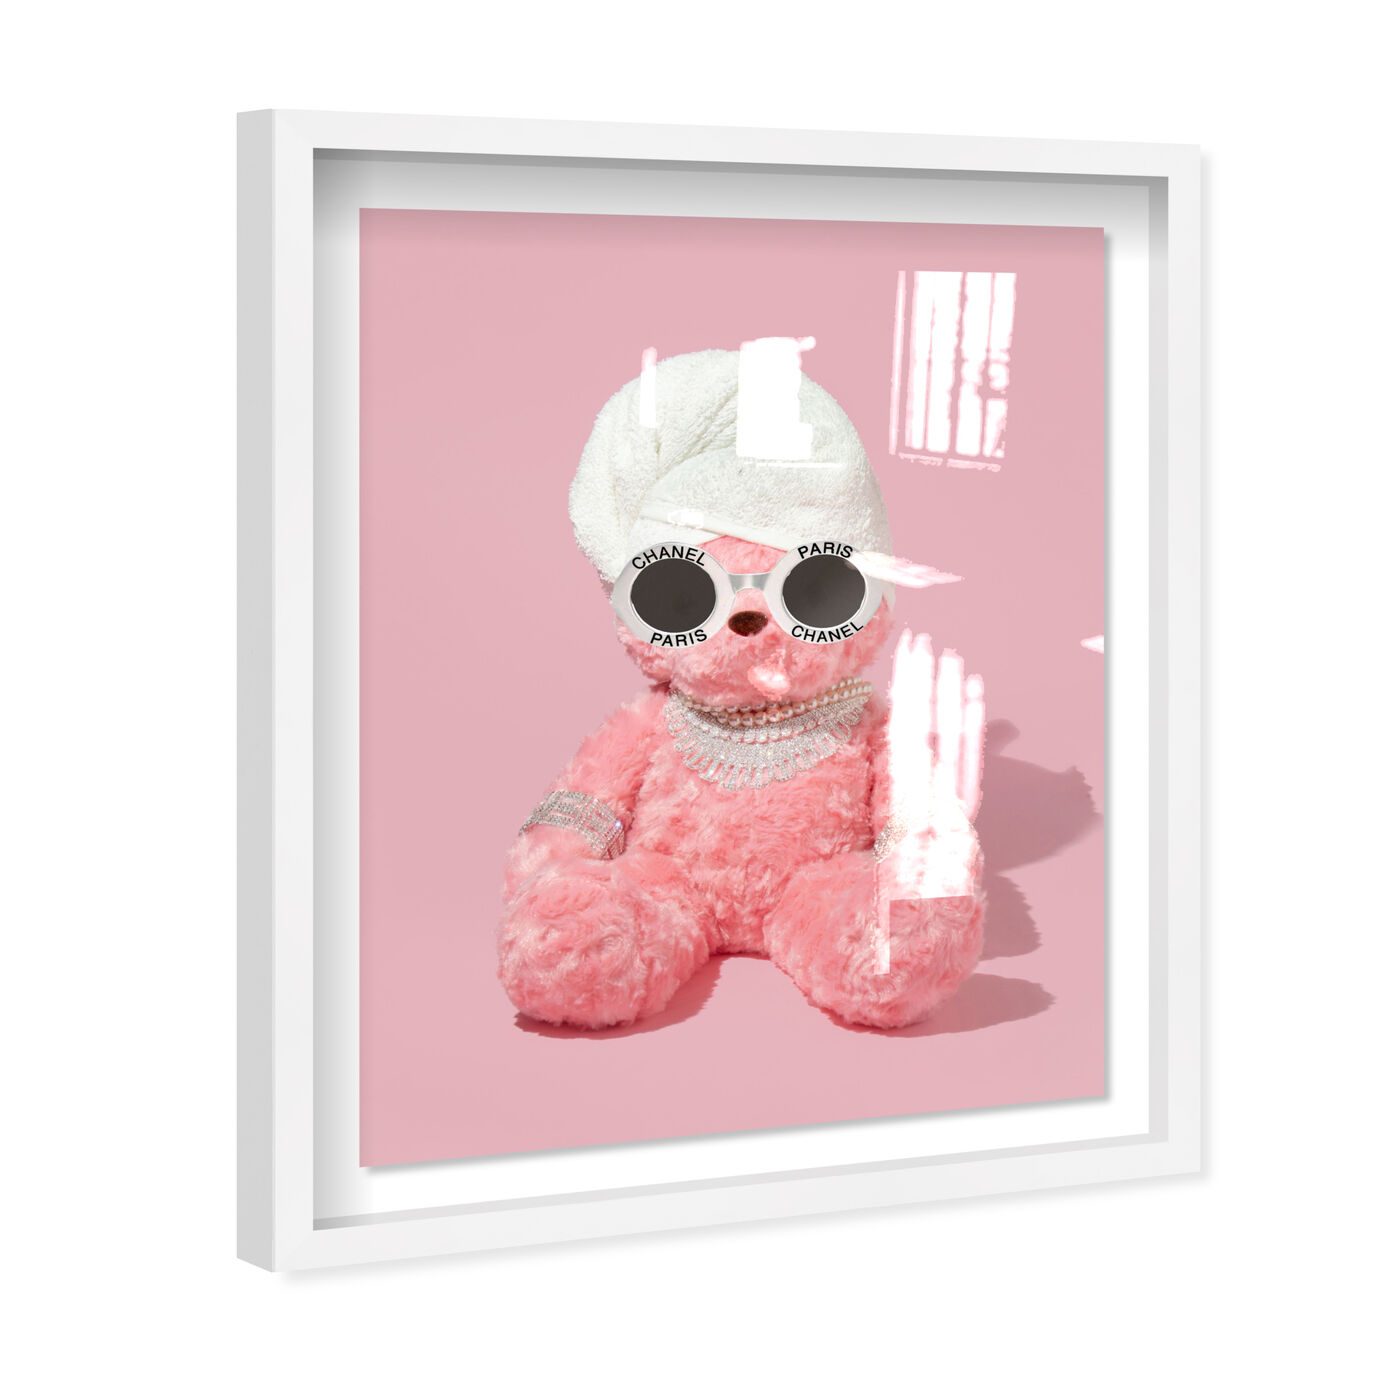 Teddy The Bae Pink - Displayed in a shadowbox